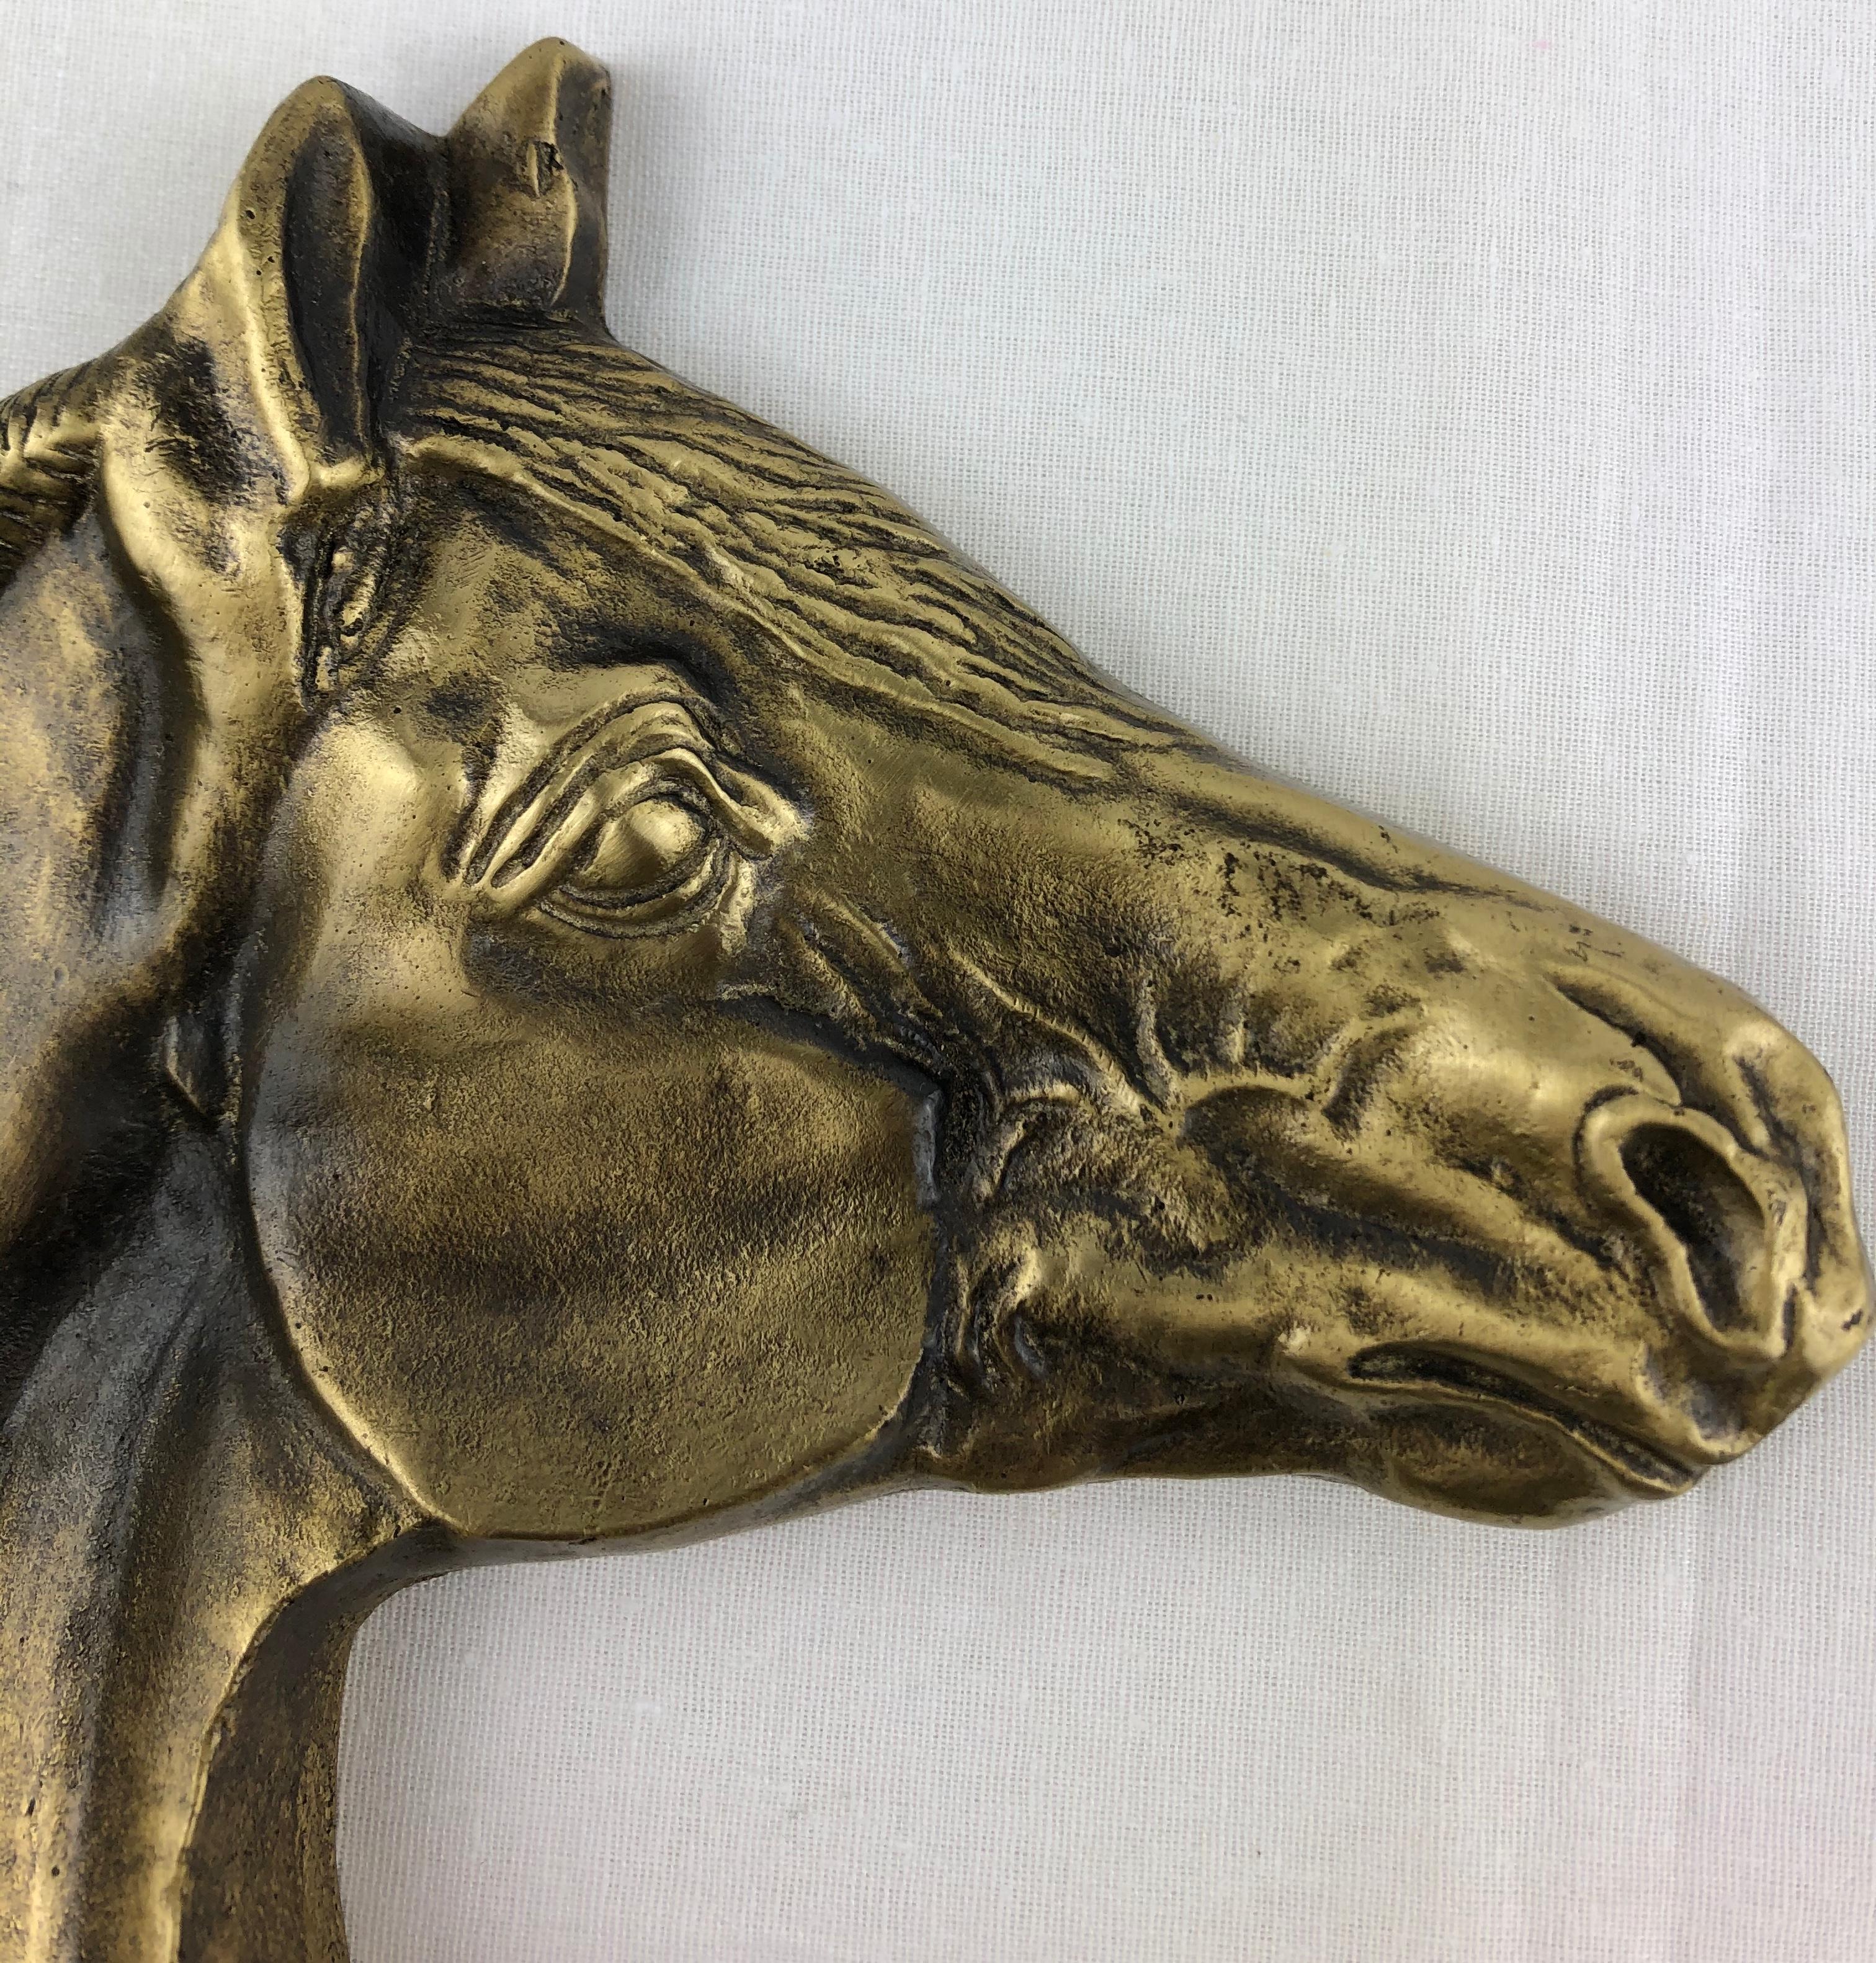 Excellent quality sculpted bronze featuring a horse's head which is a perfect key holder or vide-poche.

This wonderfully heavy bronze piece is beautifully handcrafted and displays very well on a desk, coffee table or console near an entry.

Stamped